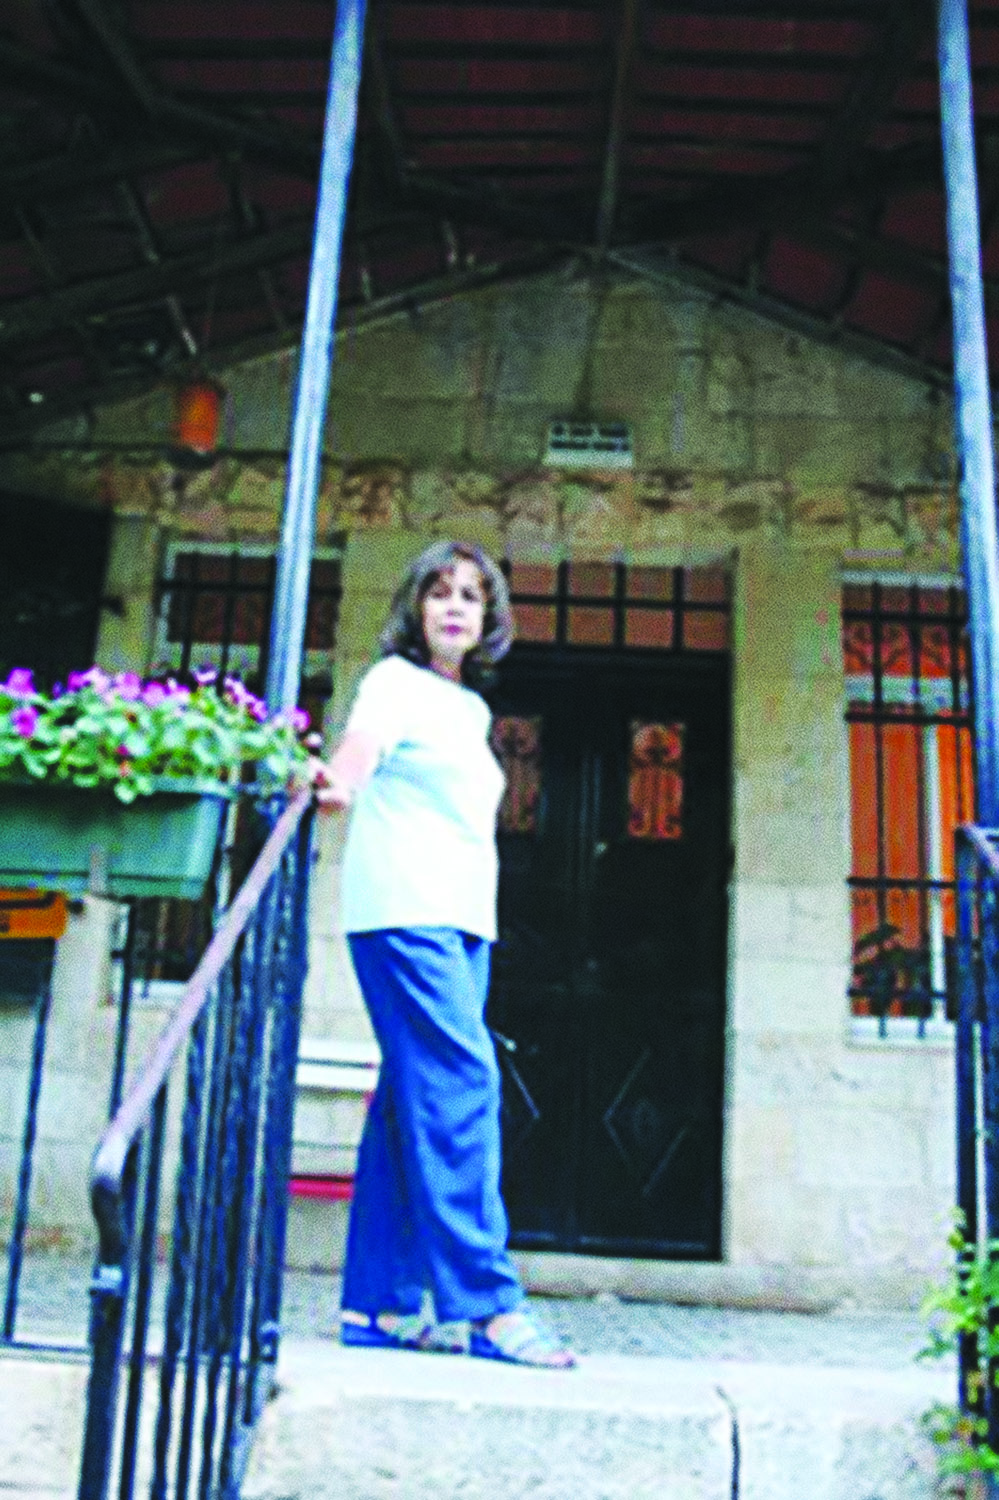 Ghada Karmi standing by the front door of her childhood home in Jerusalem’s Qatamon neighborhood in 2005. She wears a t-shirt, blue pants, and sandals. Her hand is resting on the handrail by the stair on the front porch.